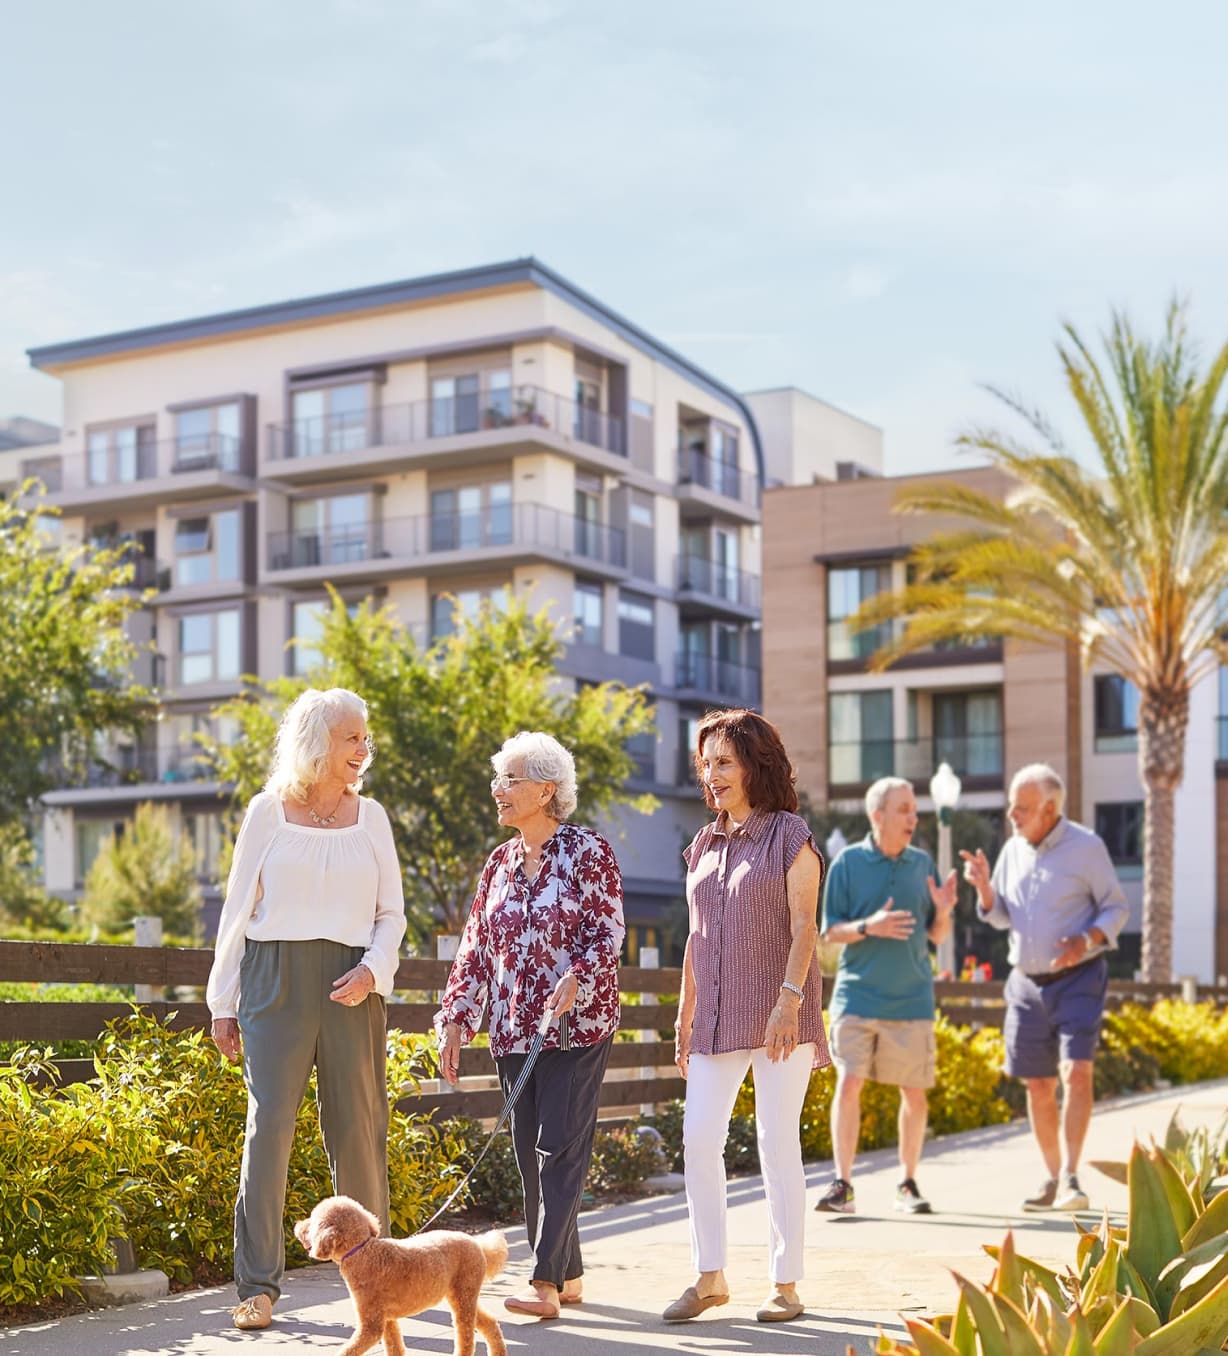 Senior adults walking and socializing in a sunny outdoor setting with modern apartment buildings in the background, indicating a vibrant retirement community.